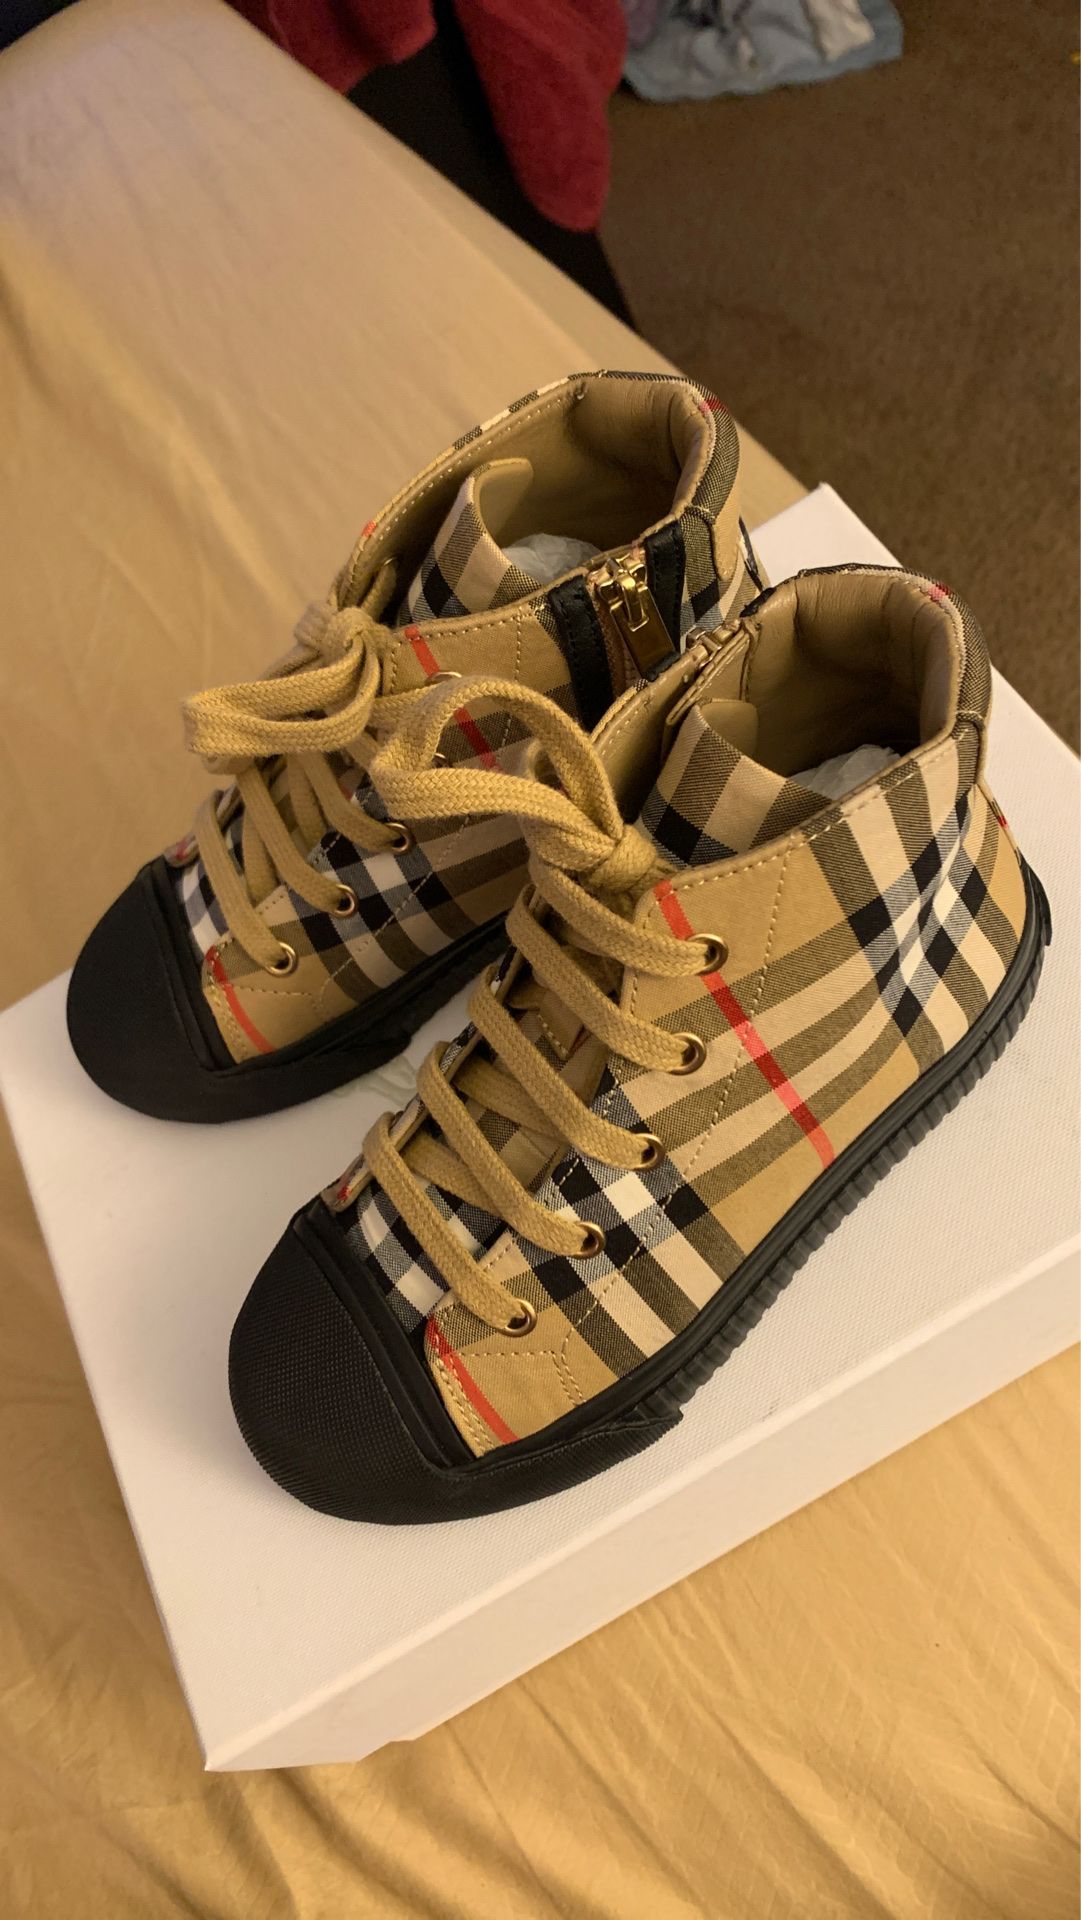 Burberry shoes size 12.5 US 30 Euro